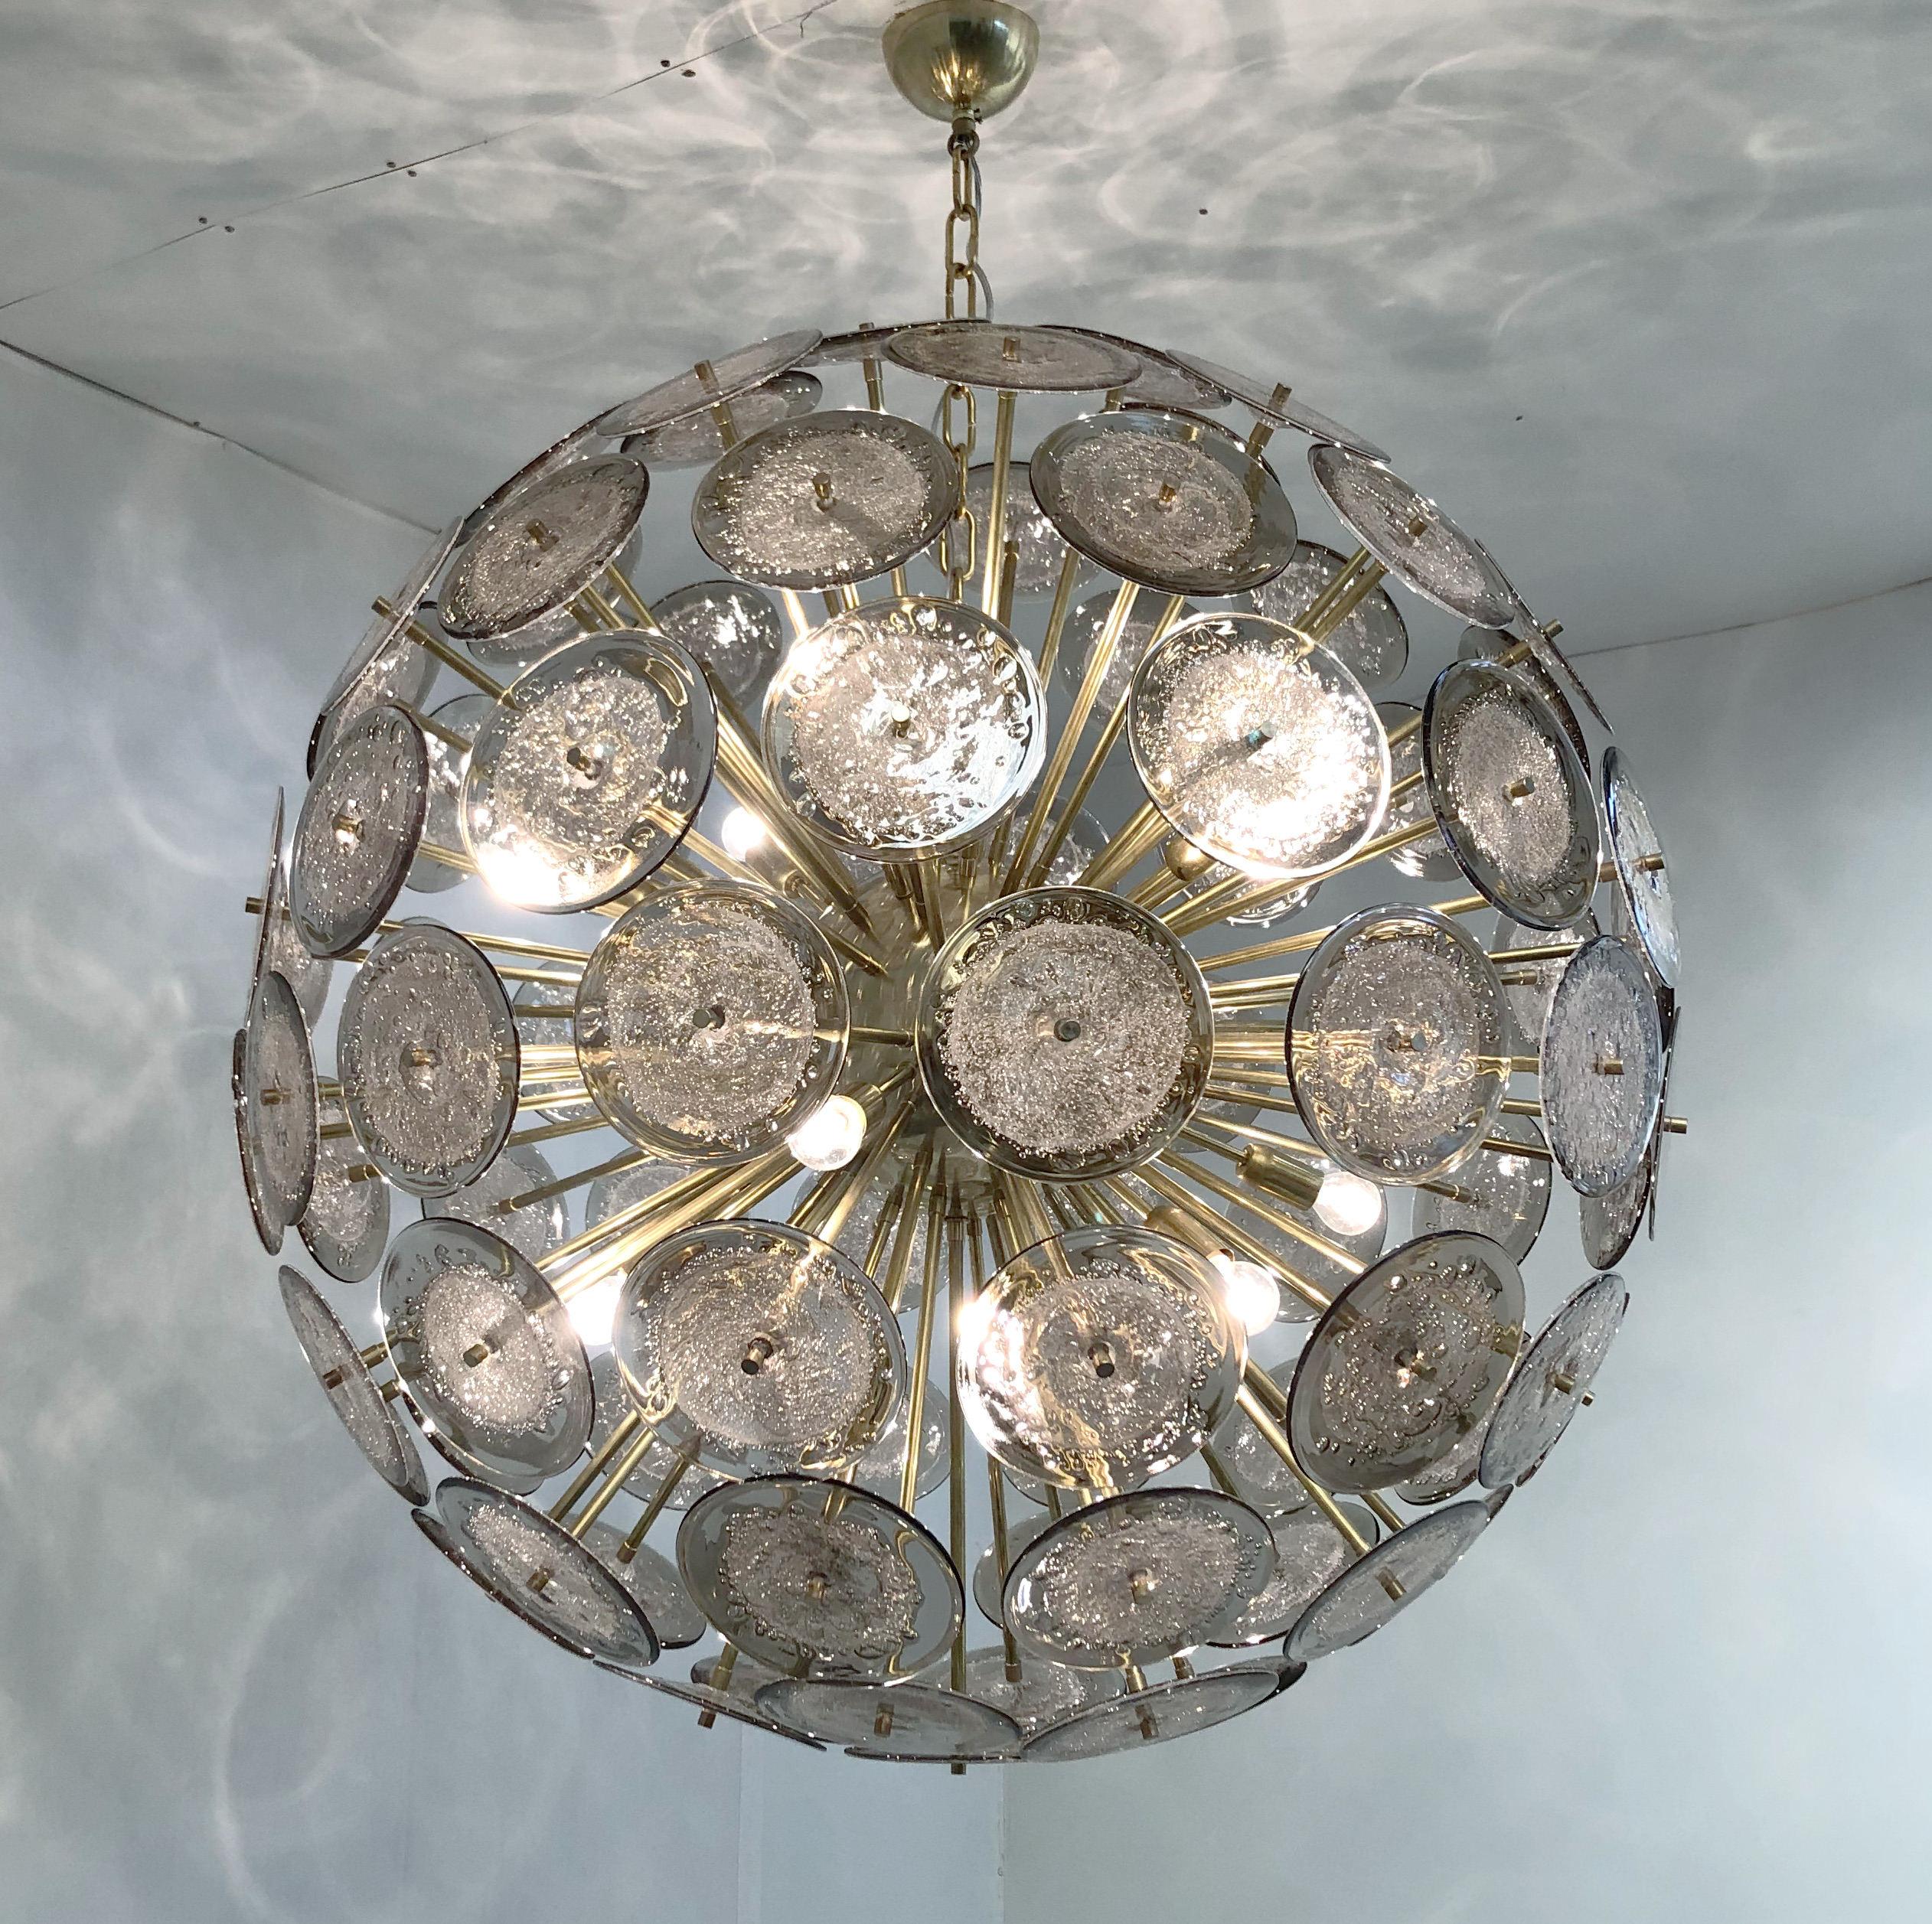 Italian round Sputnik chandelier with smoky gray Murano glass discs hand blown with bubbles using Pulegoso technique, mounted on unlacquered natural brass finish frame which will develop patina, by Fabio Ltd / Made in Italy.
12 lights / E26 or E27